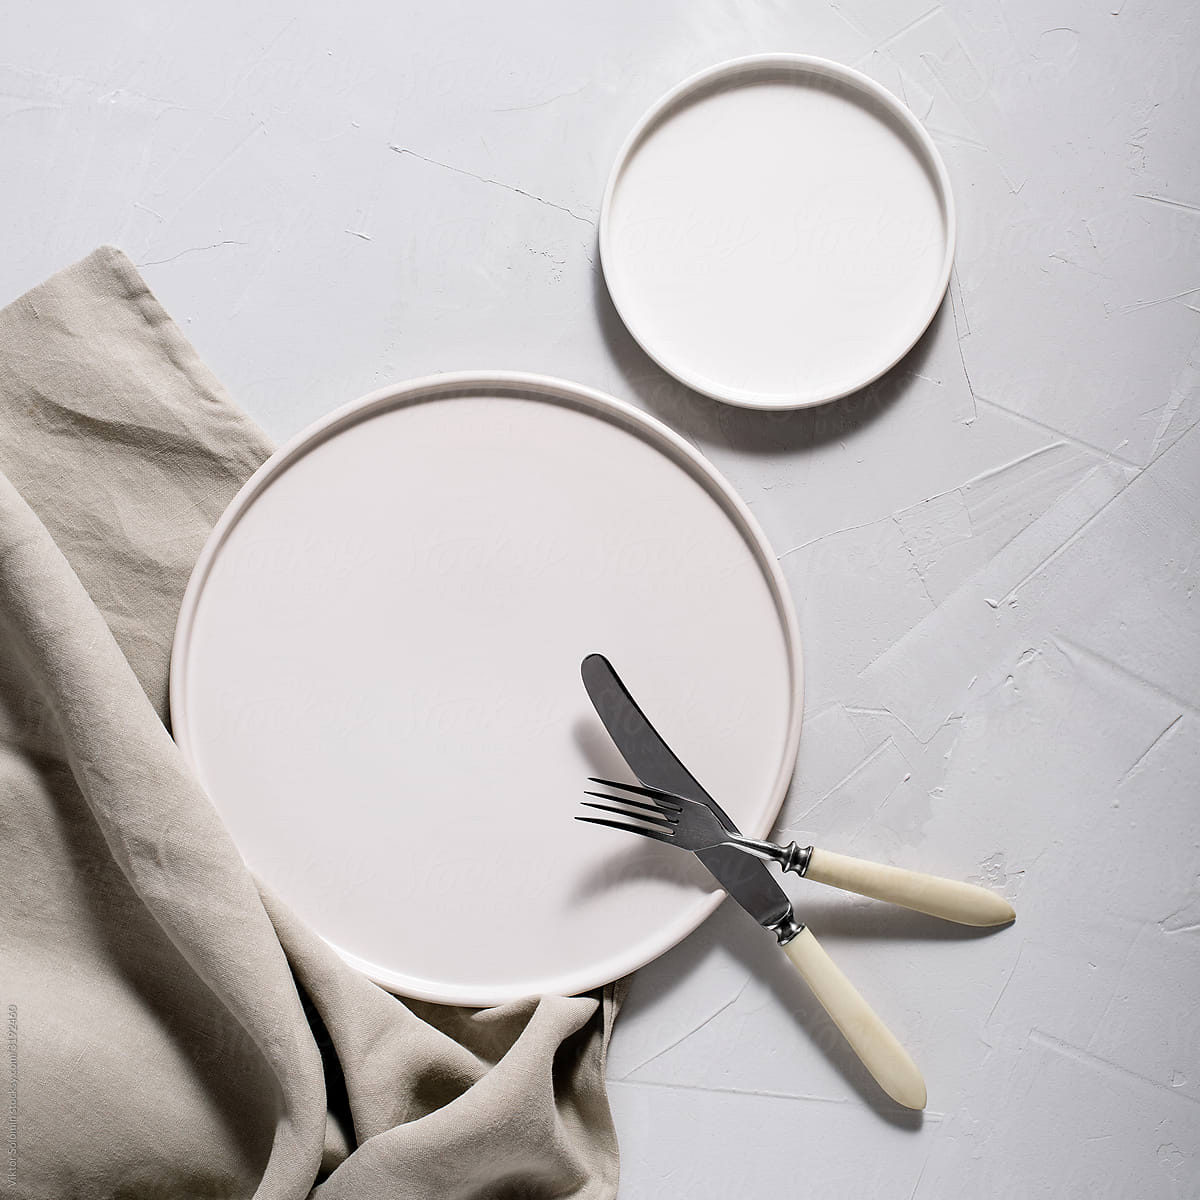 White background round plate, fork, knife and napkin